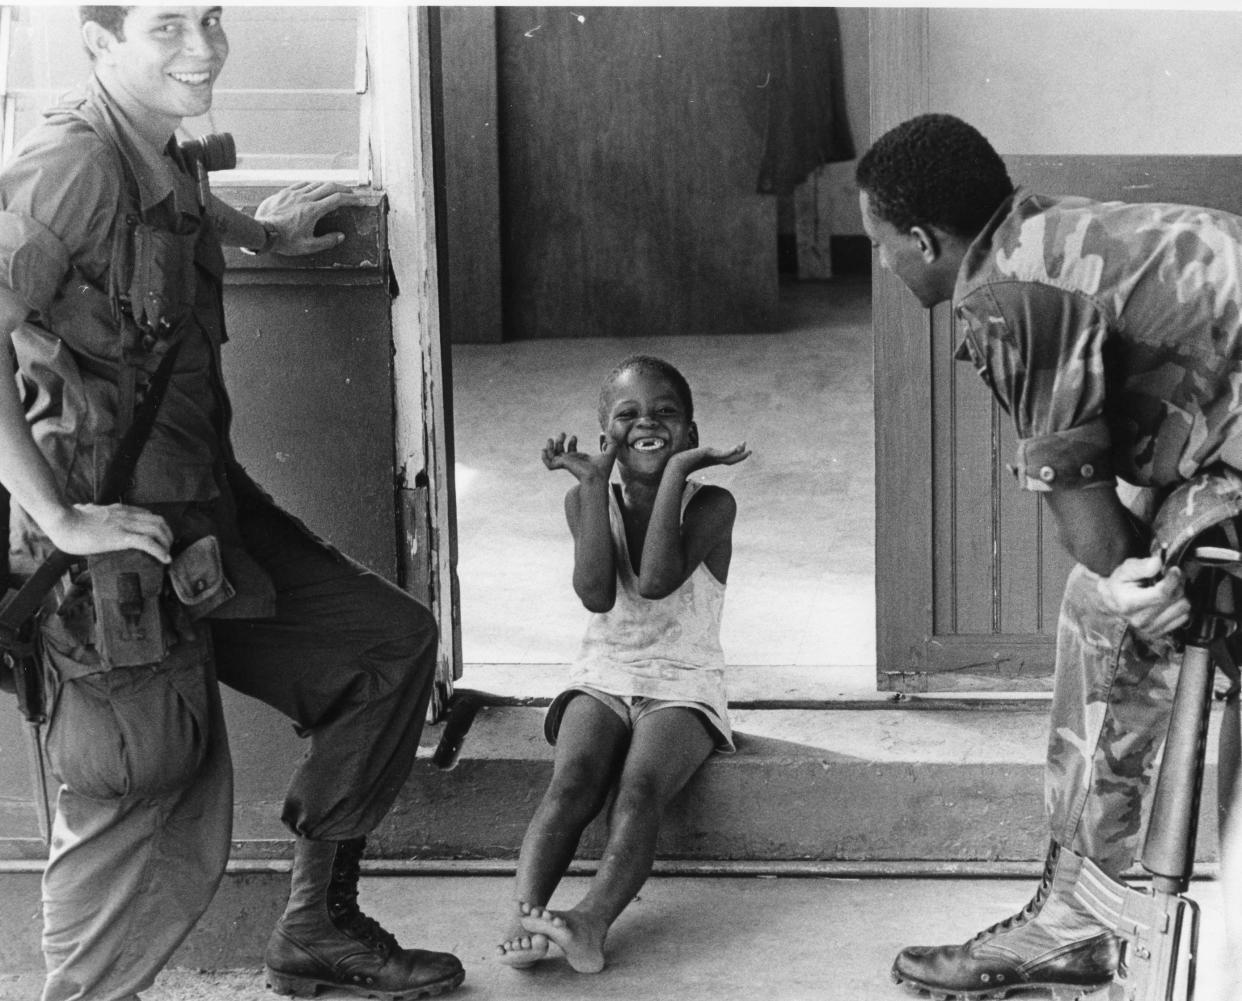 Unidentified paratroopers talk to a child in Grenada in November 1983.